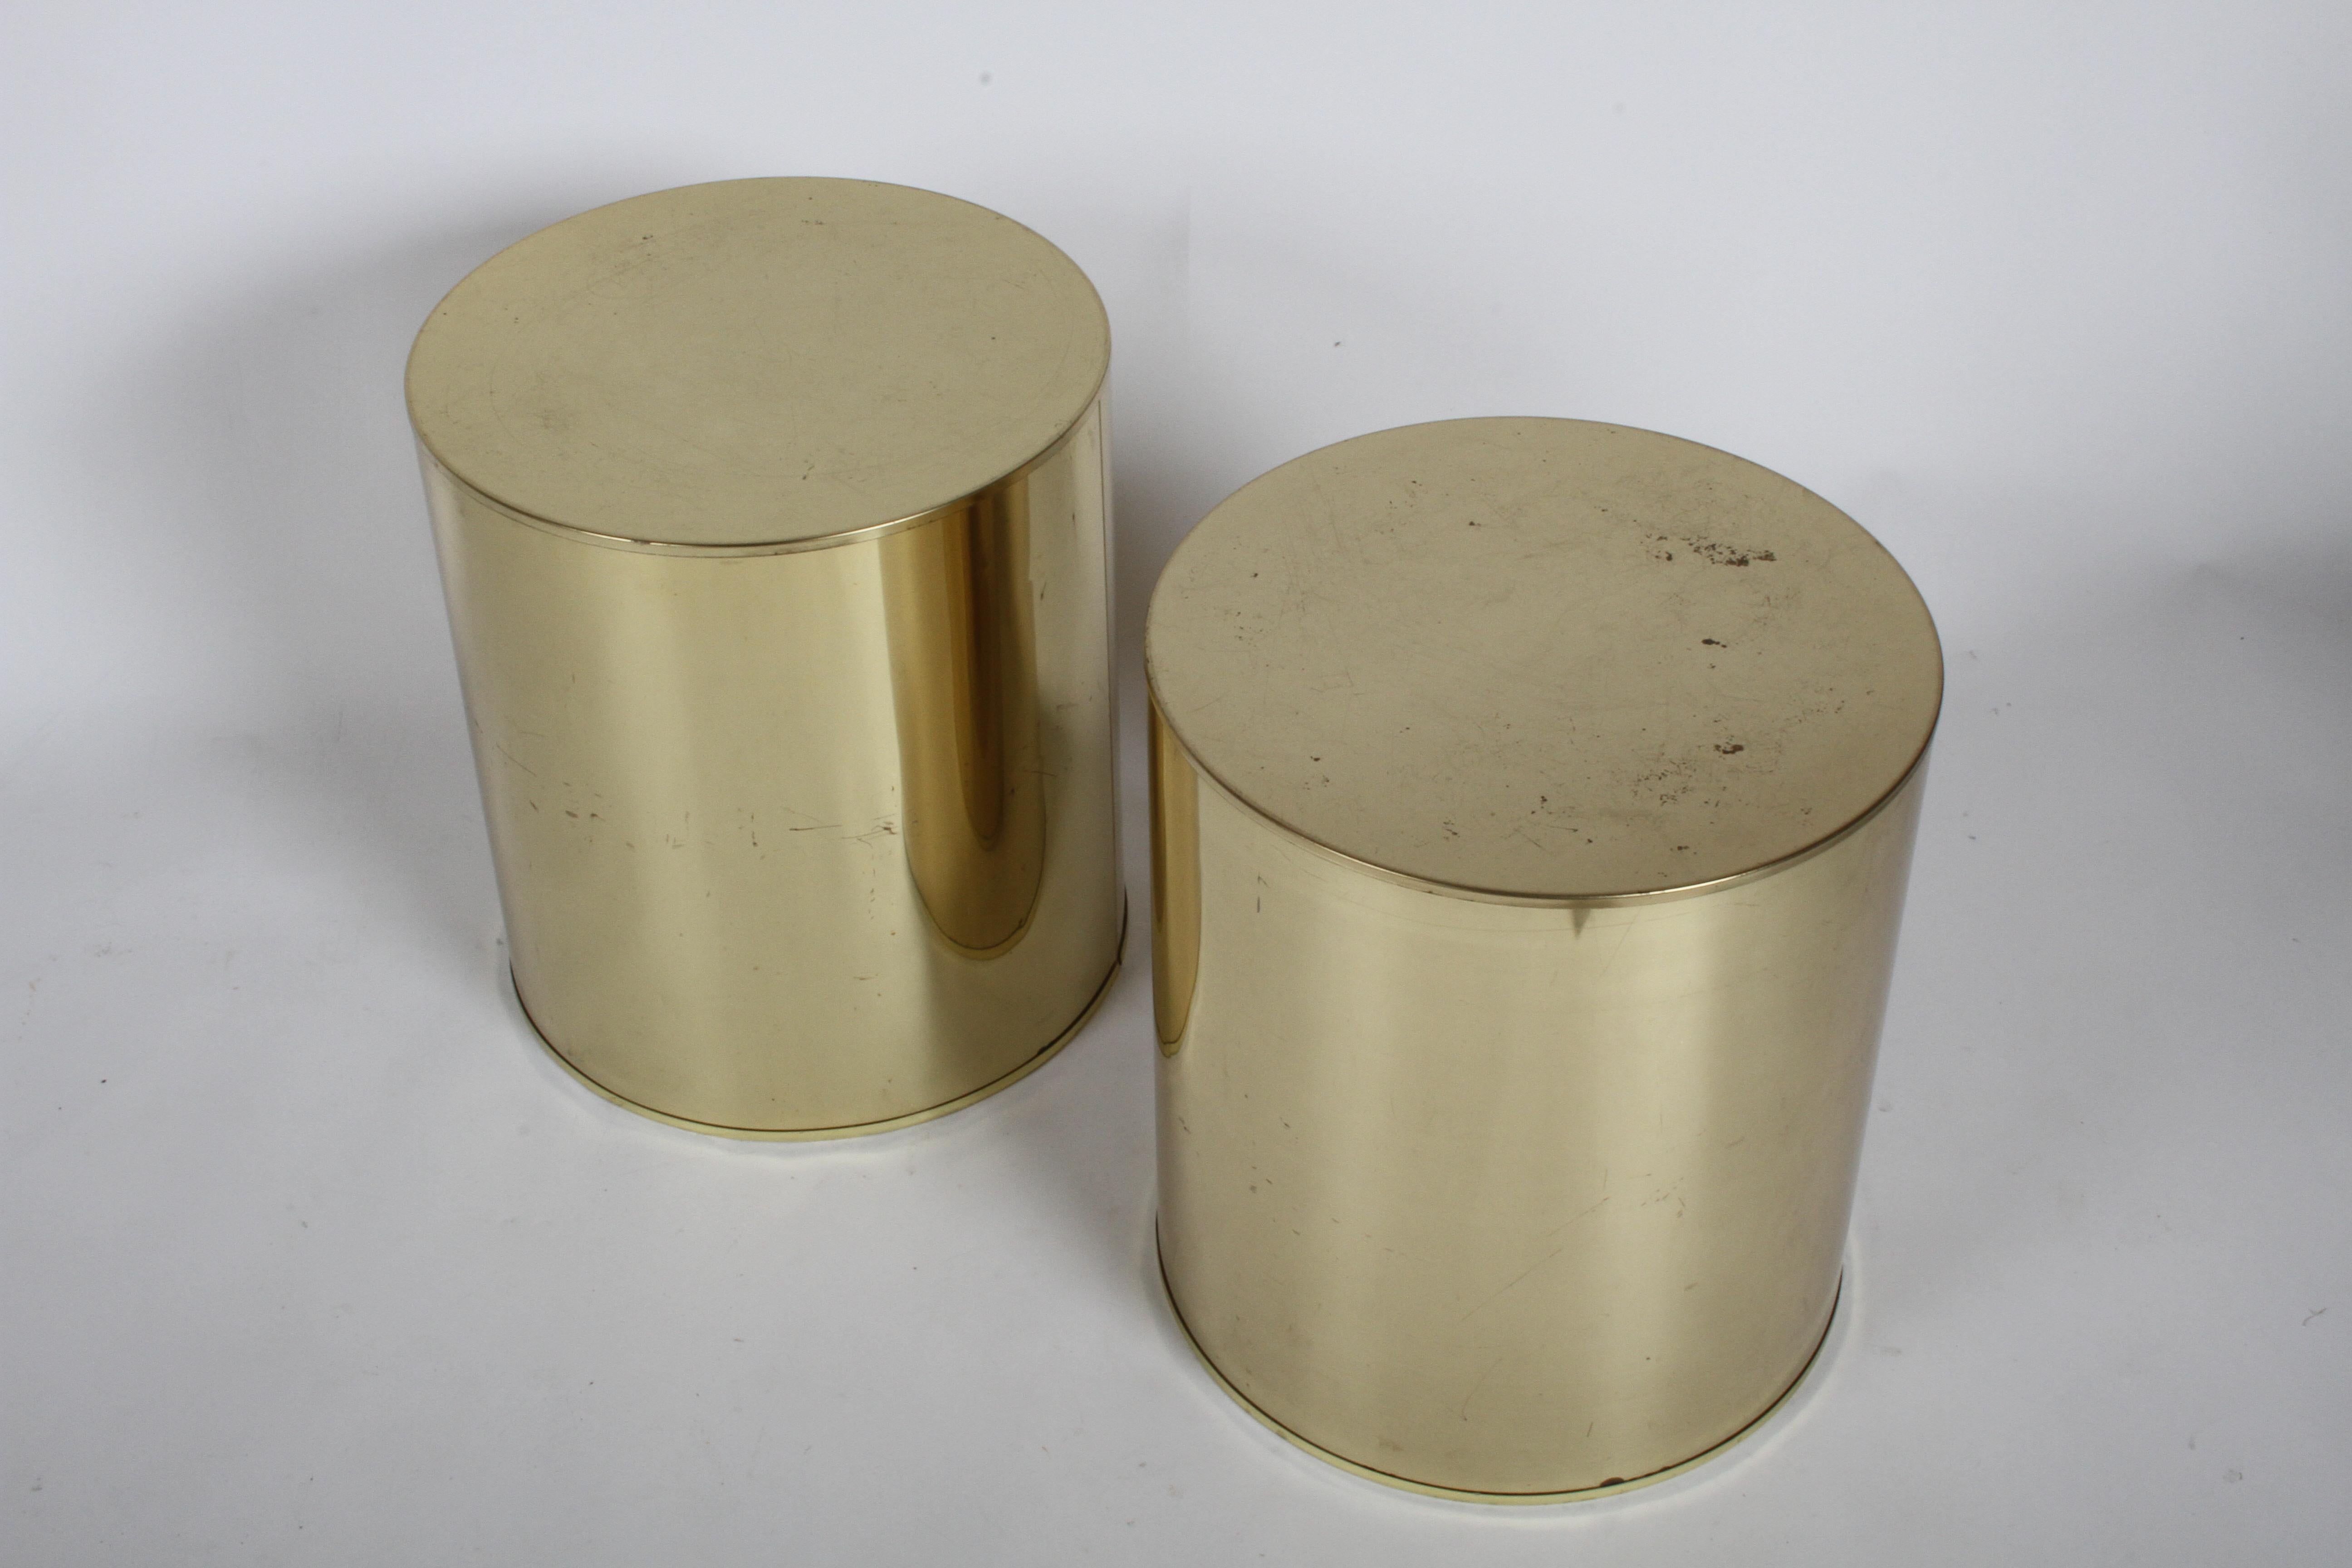 Pair of Hollywood Regency Curtis Jeré brass drum form end, side tables or display pedestals. Signed C. Jere, circa 1970s. Wear to finish on tops, some patina on sides, minor dings, metal is reflective so it picked up at lot flaws in the paper and